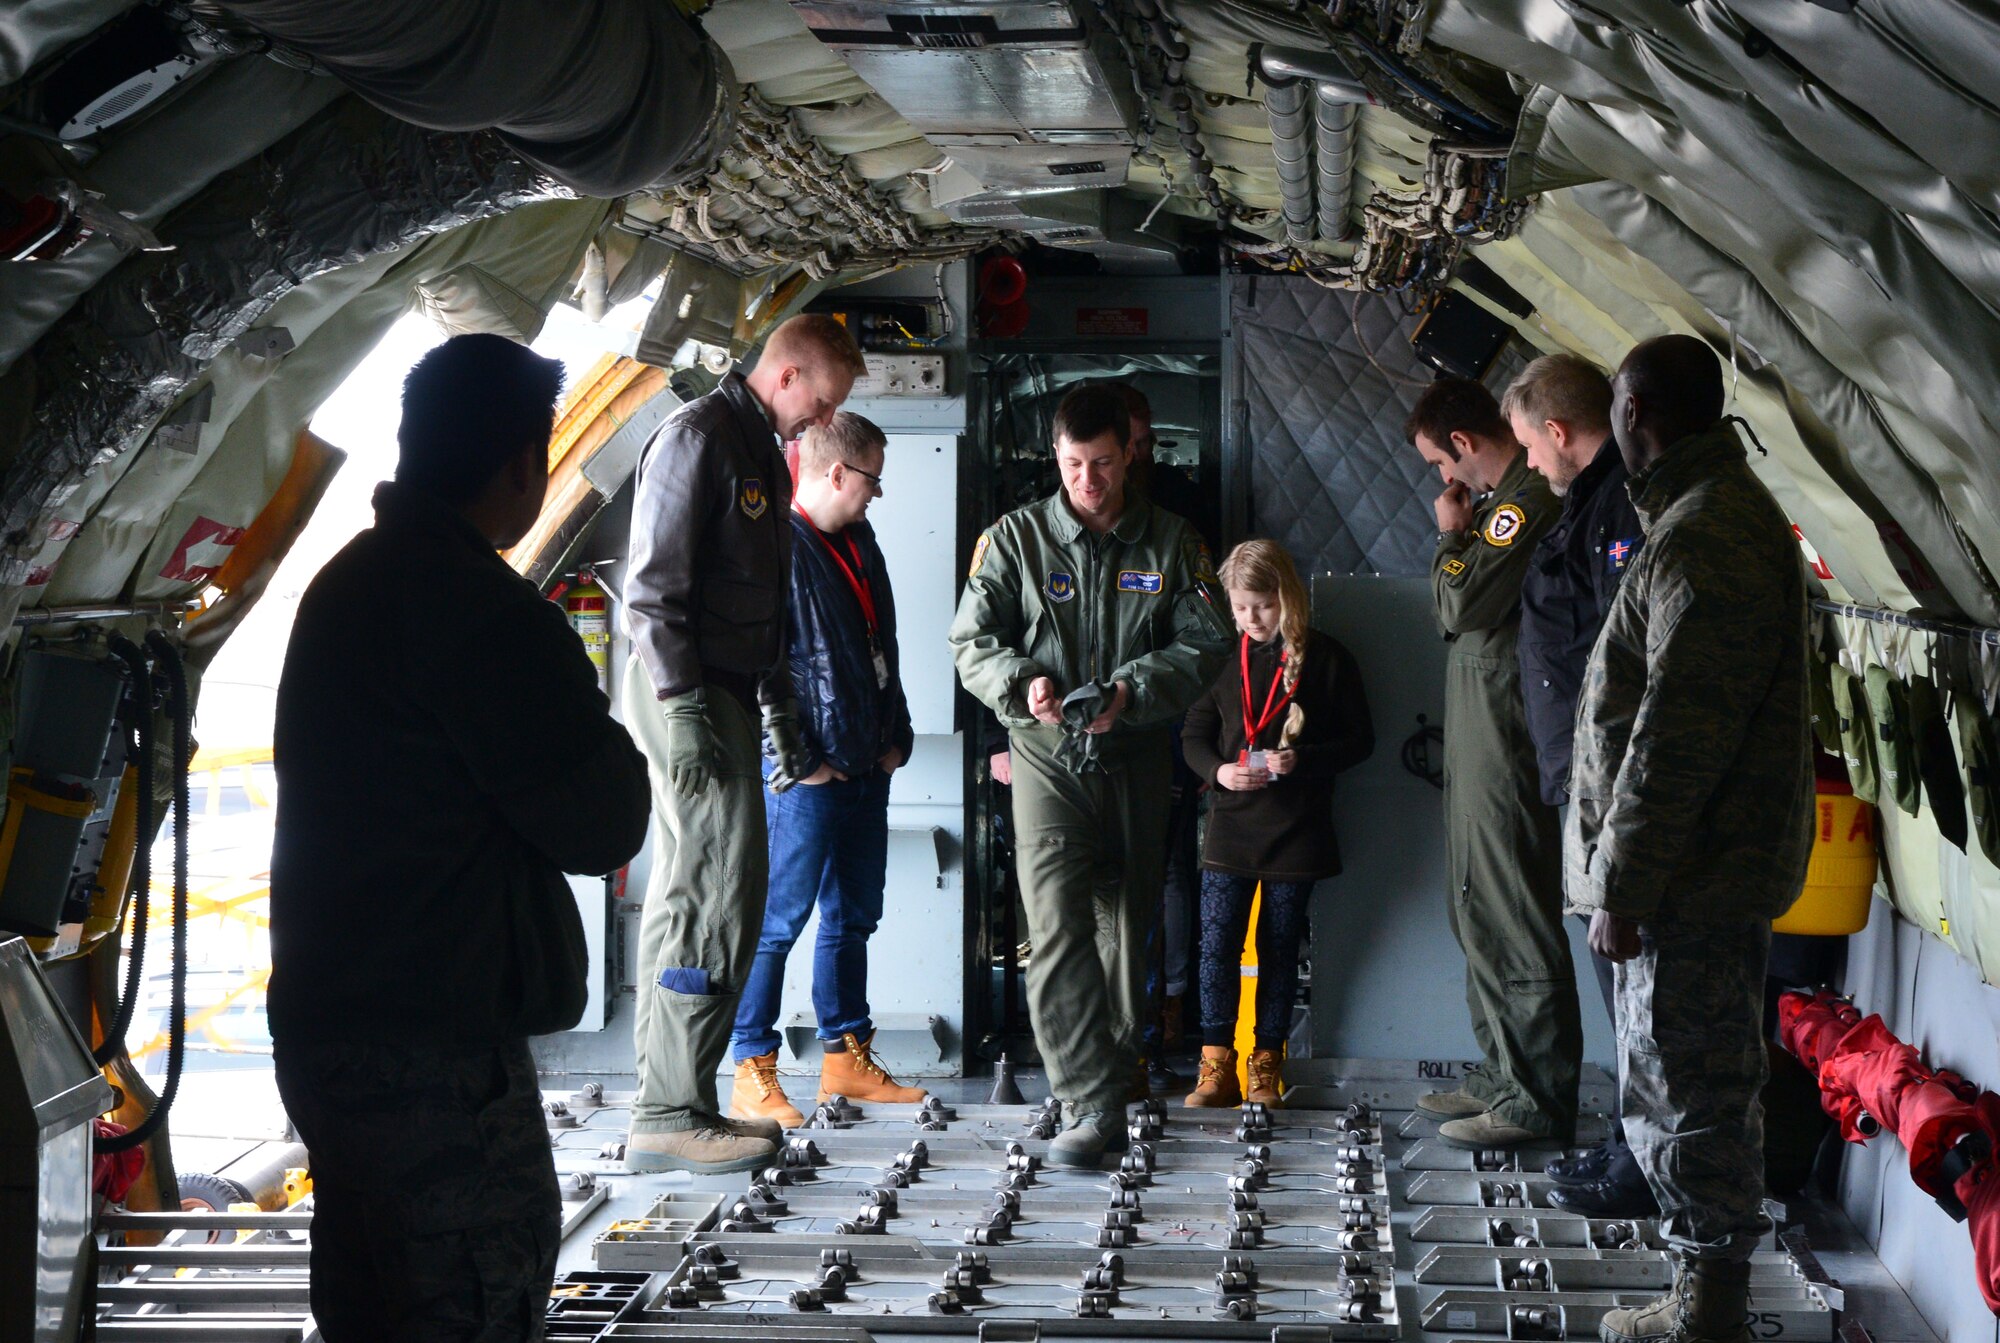 U.S. Airmen from the 871st Air Expeditionary Squadron give Gunnar Guðlaugsson, Arna Tryggvadóttir and their families a tour of a KC-135 Stratotanker aircraft during the Pilot for a Day program at Keflavik International Airport, Iceland, May 13, 2015. The program allowed two terminally ill Icelandic children to tour operations at Keflavik and experience a day in the life of a U.S. Air Force pilot.(U.S. Air Force photo by 2nd Lt. Meredith Mulvihill/Released)